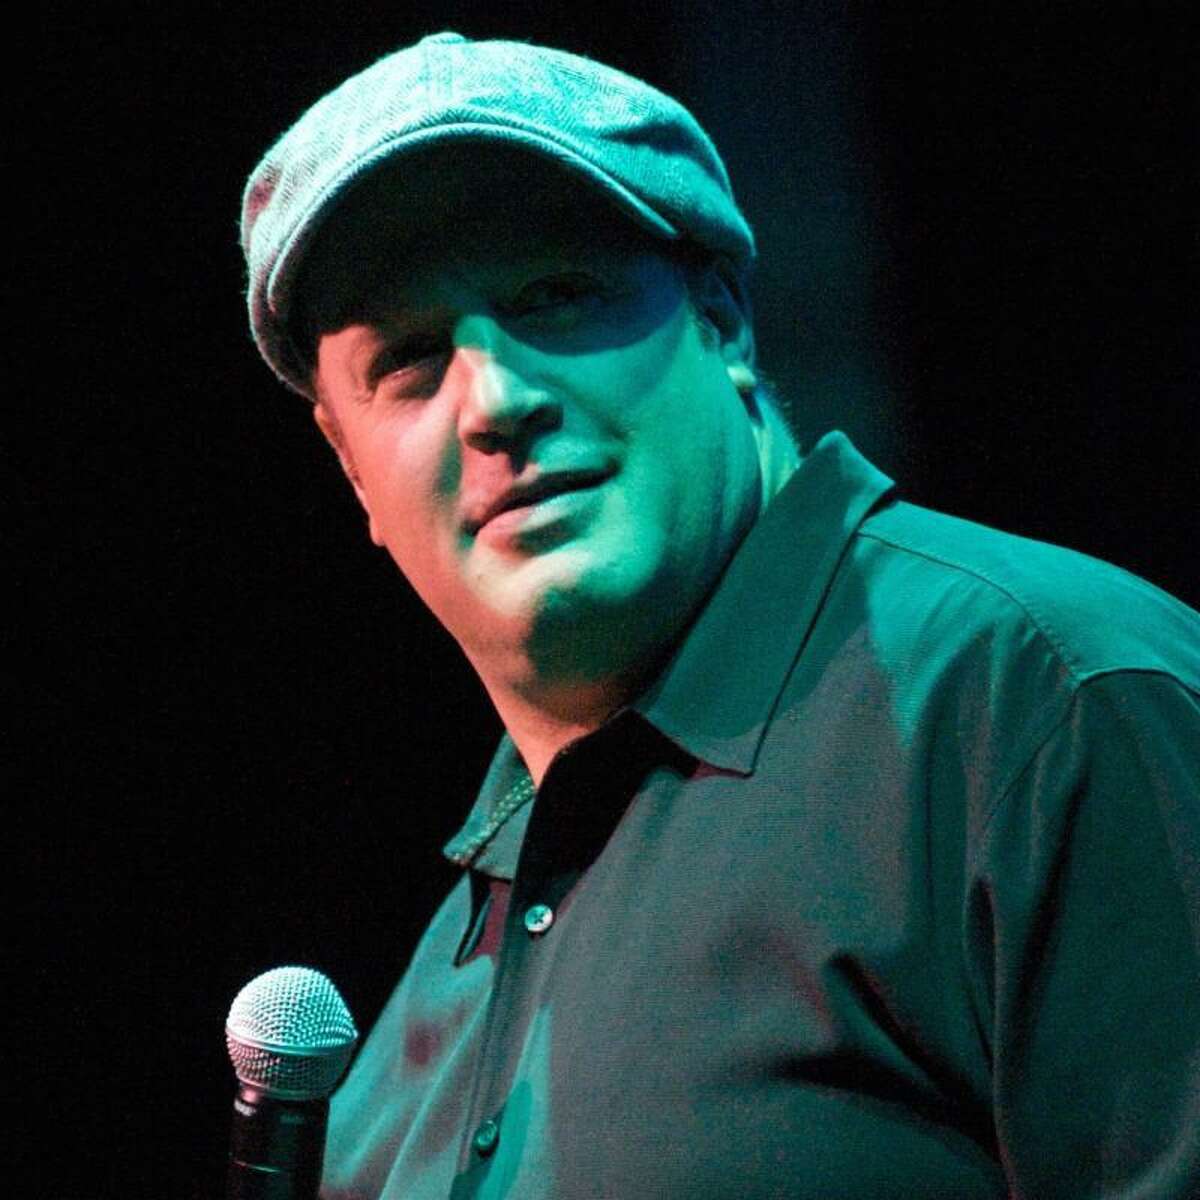 Kevin James is performing at the Warner Theatre in May.